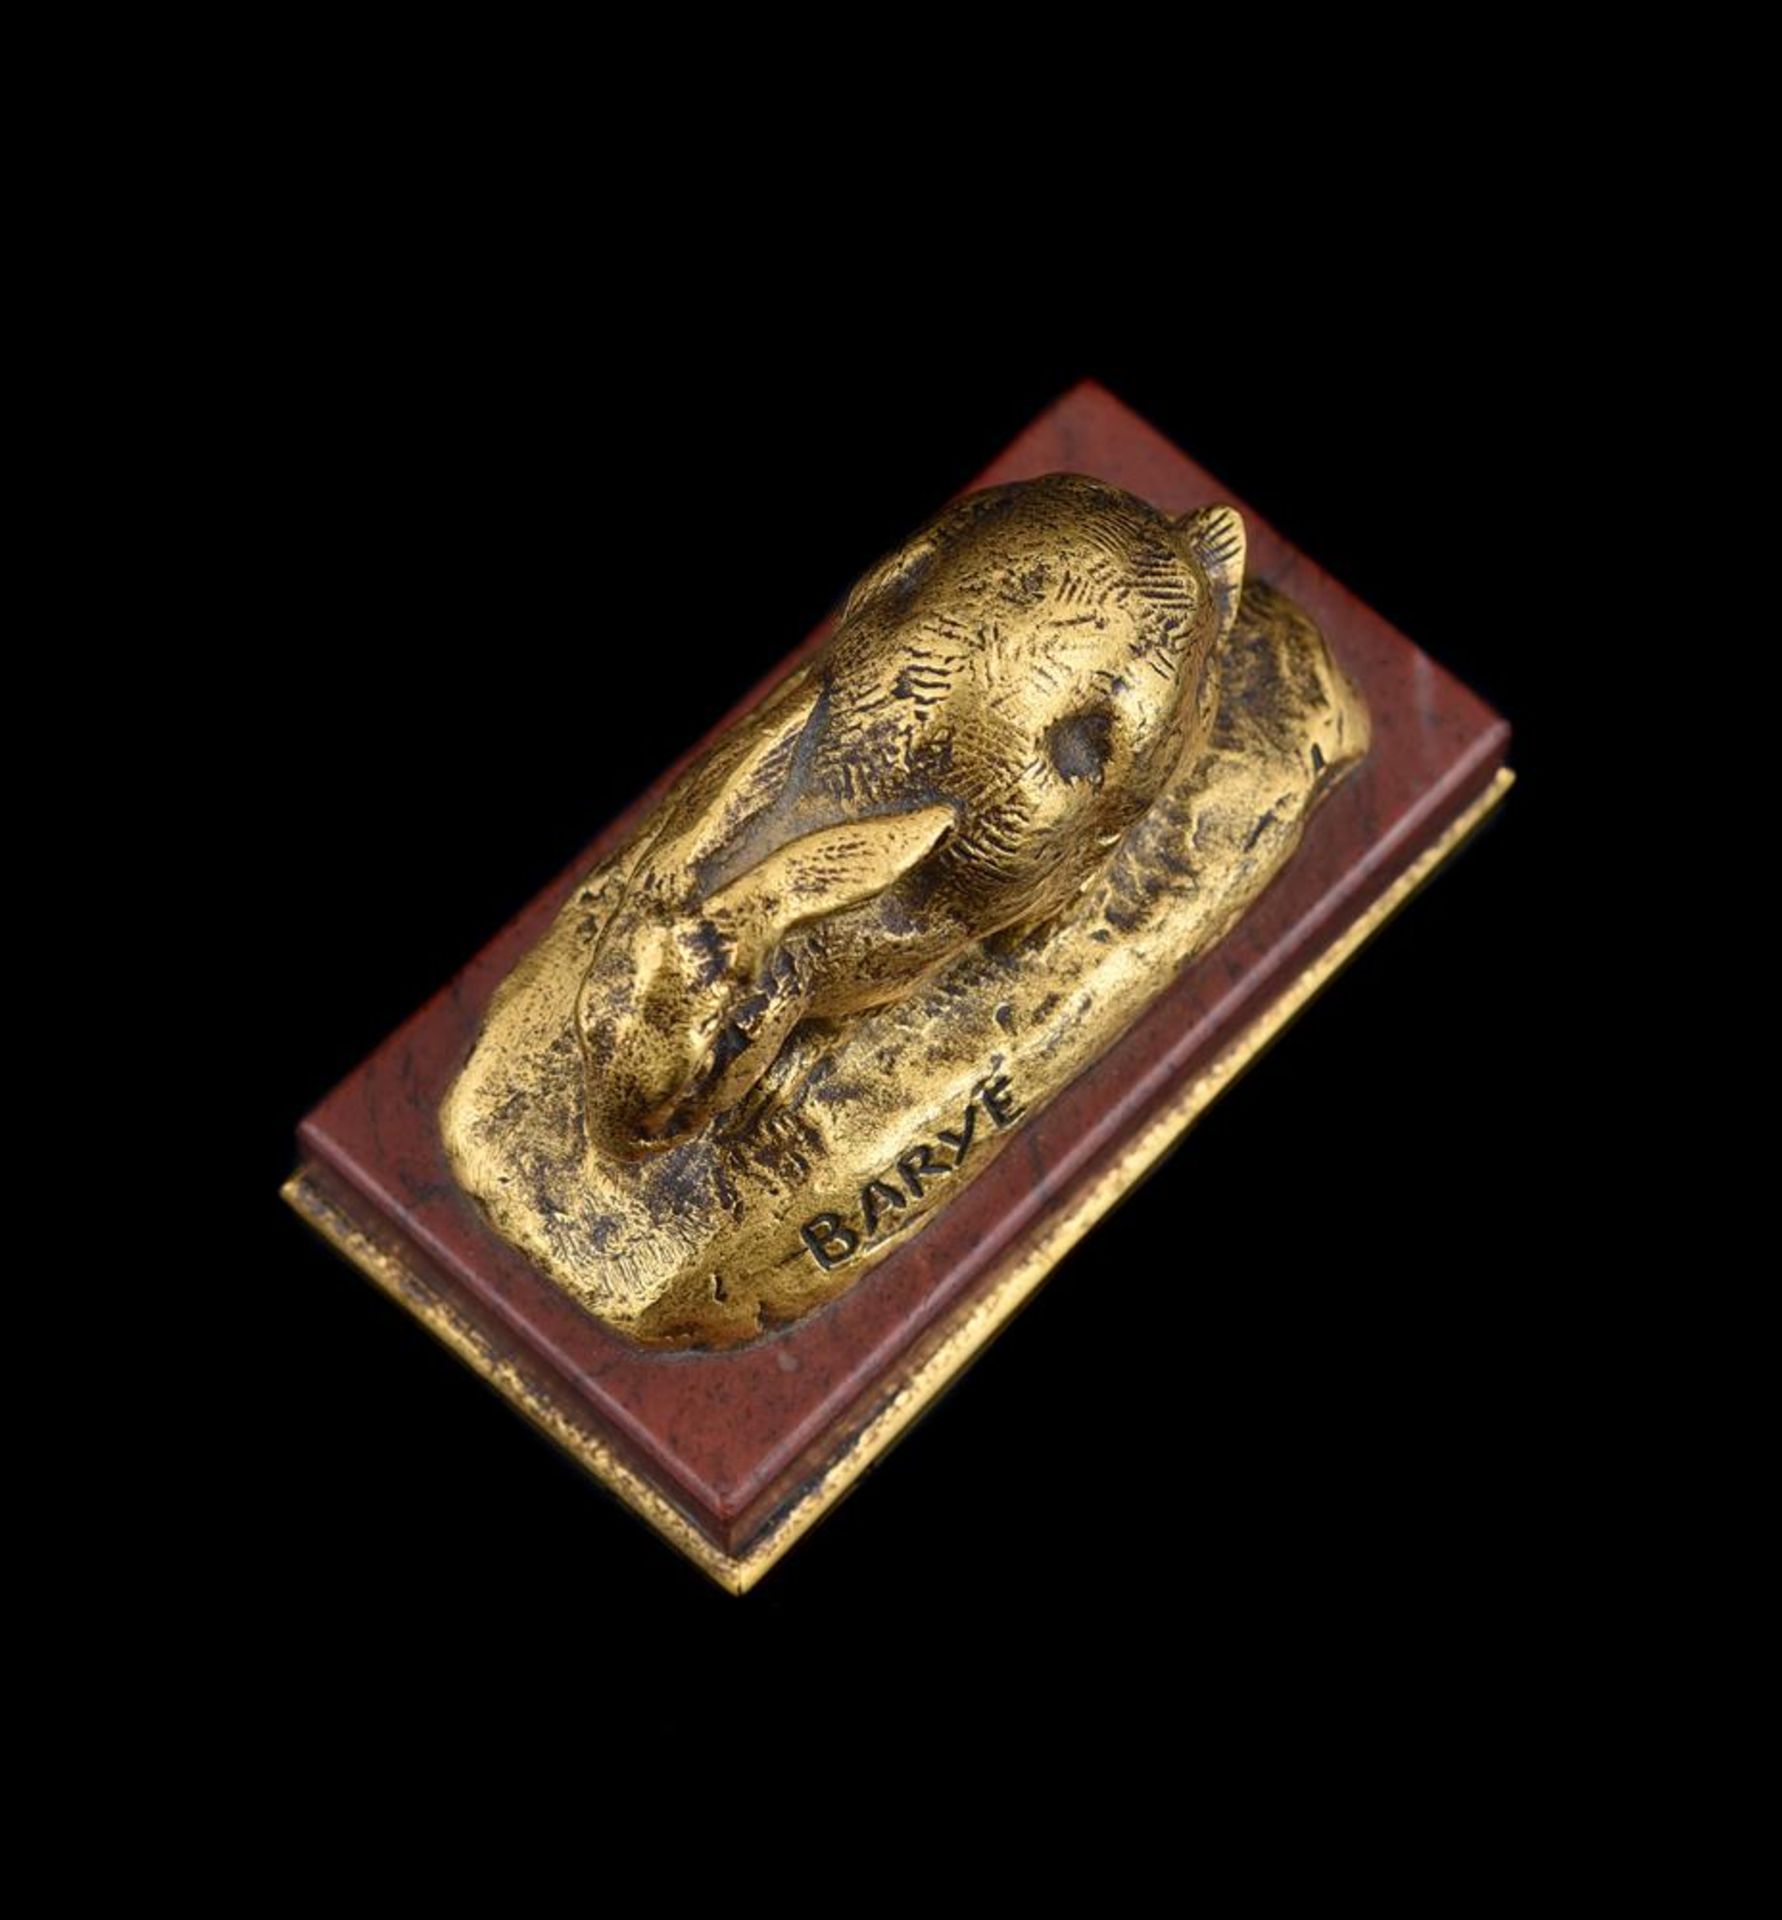 ANTOINE-LOUIS BARYE (FRENCH, 1795-1875), A GILT BRONZE MODEL OF A CROUCHING RABBIT - Image 5 of 6